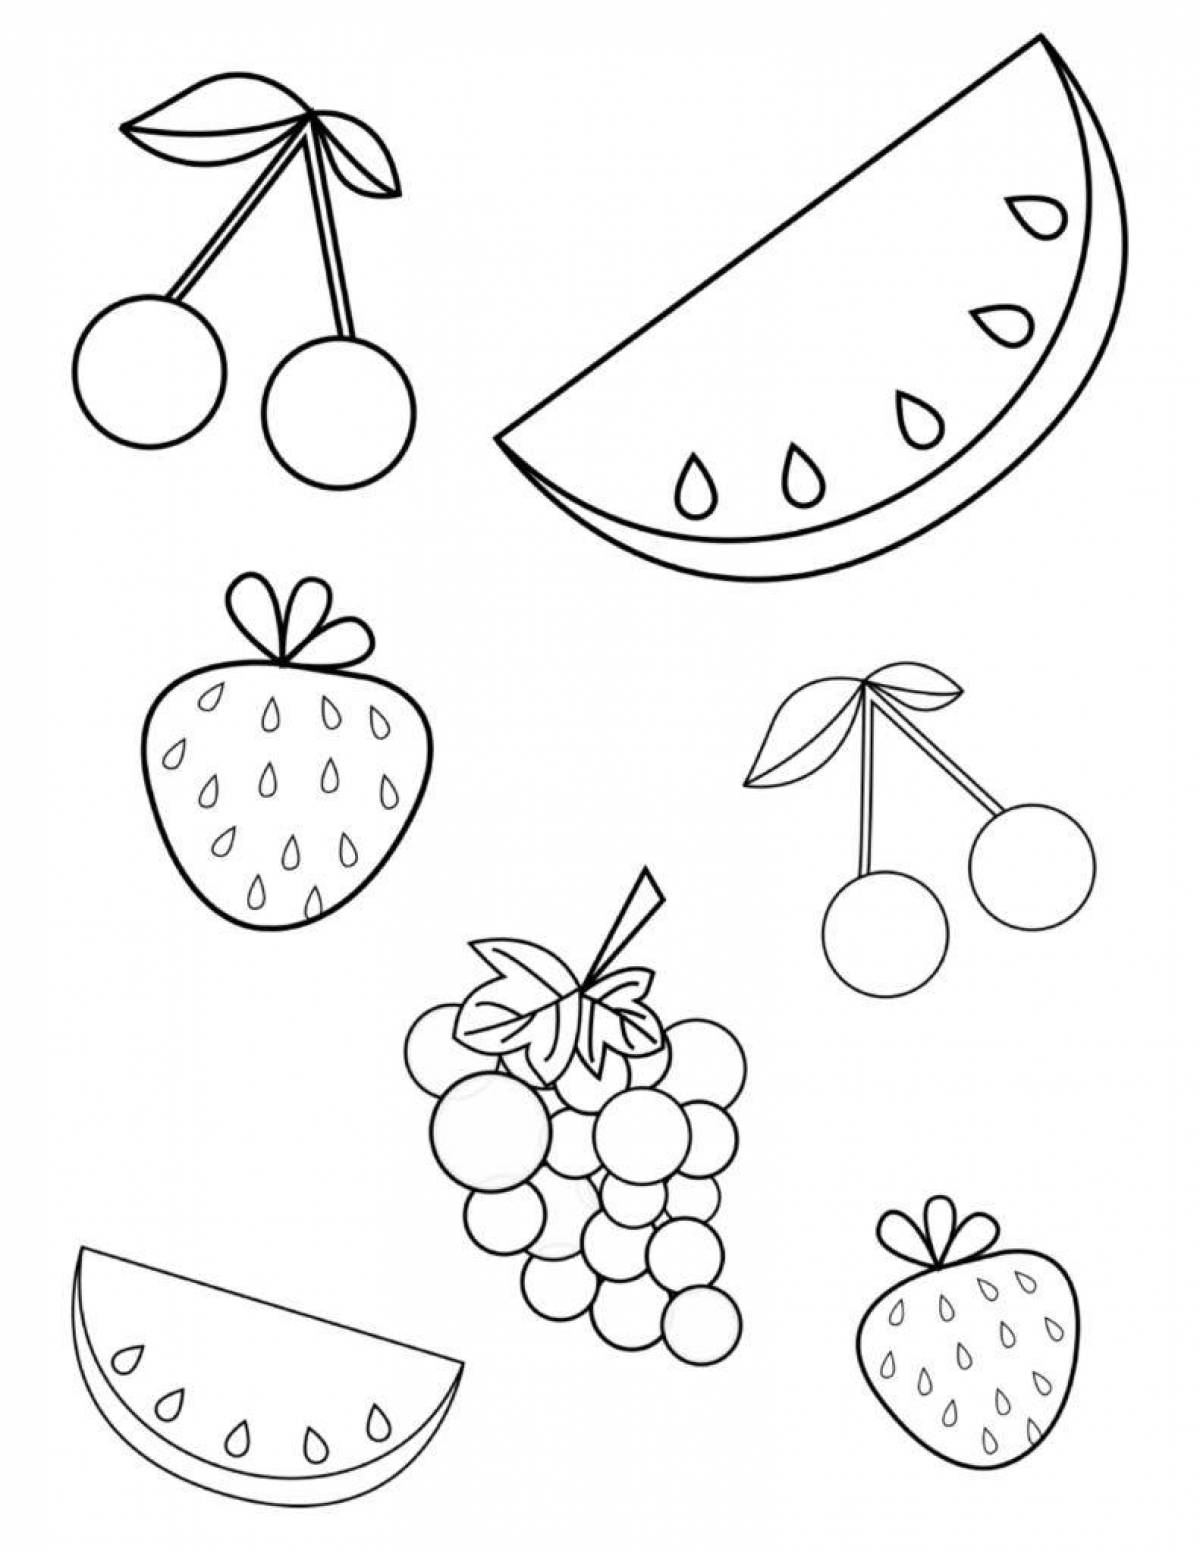 Coloring book magical fruits for girls